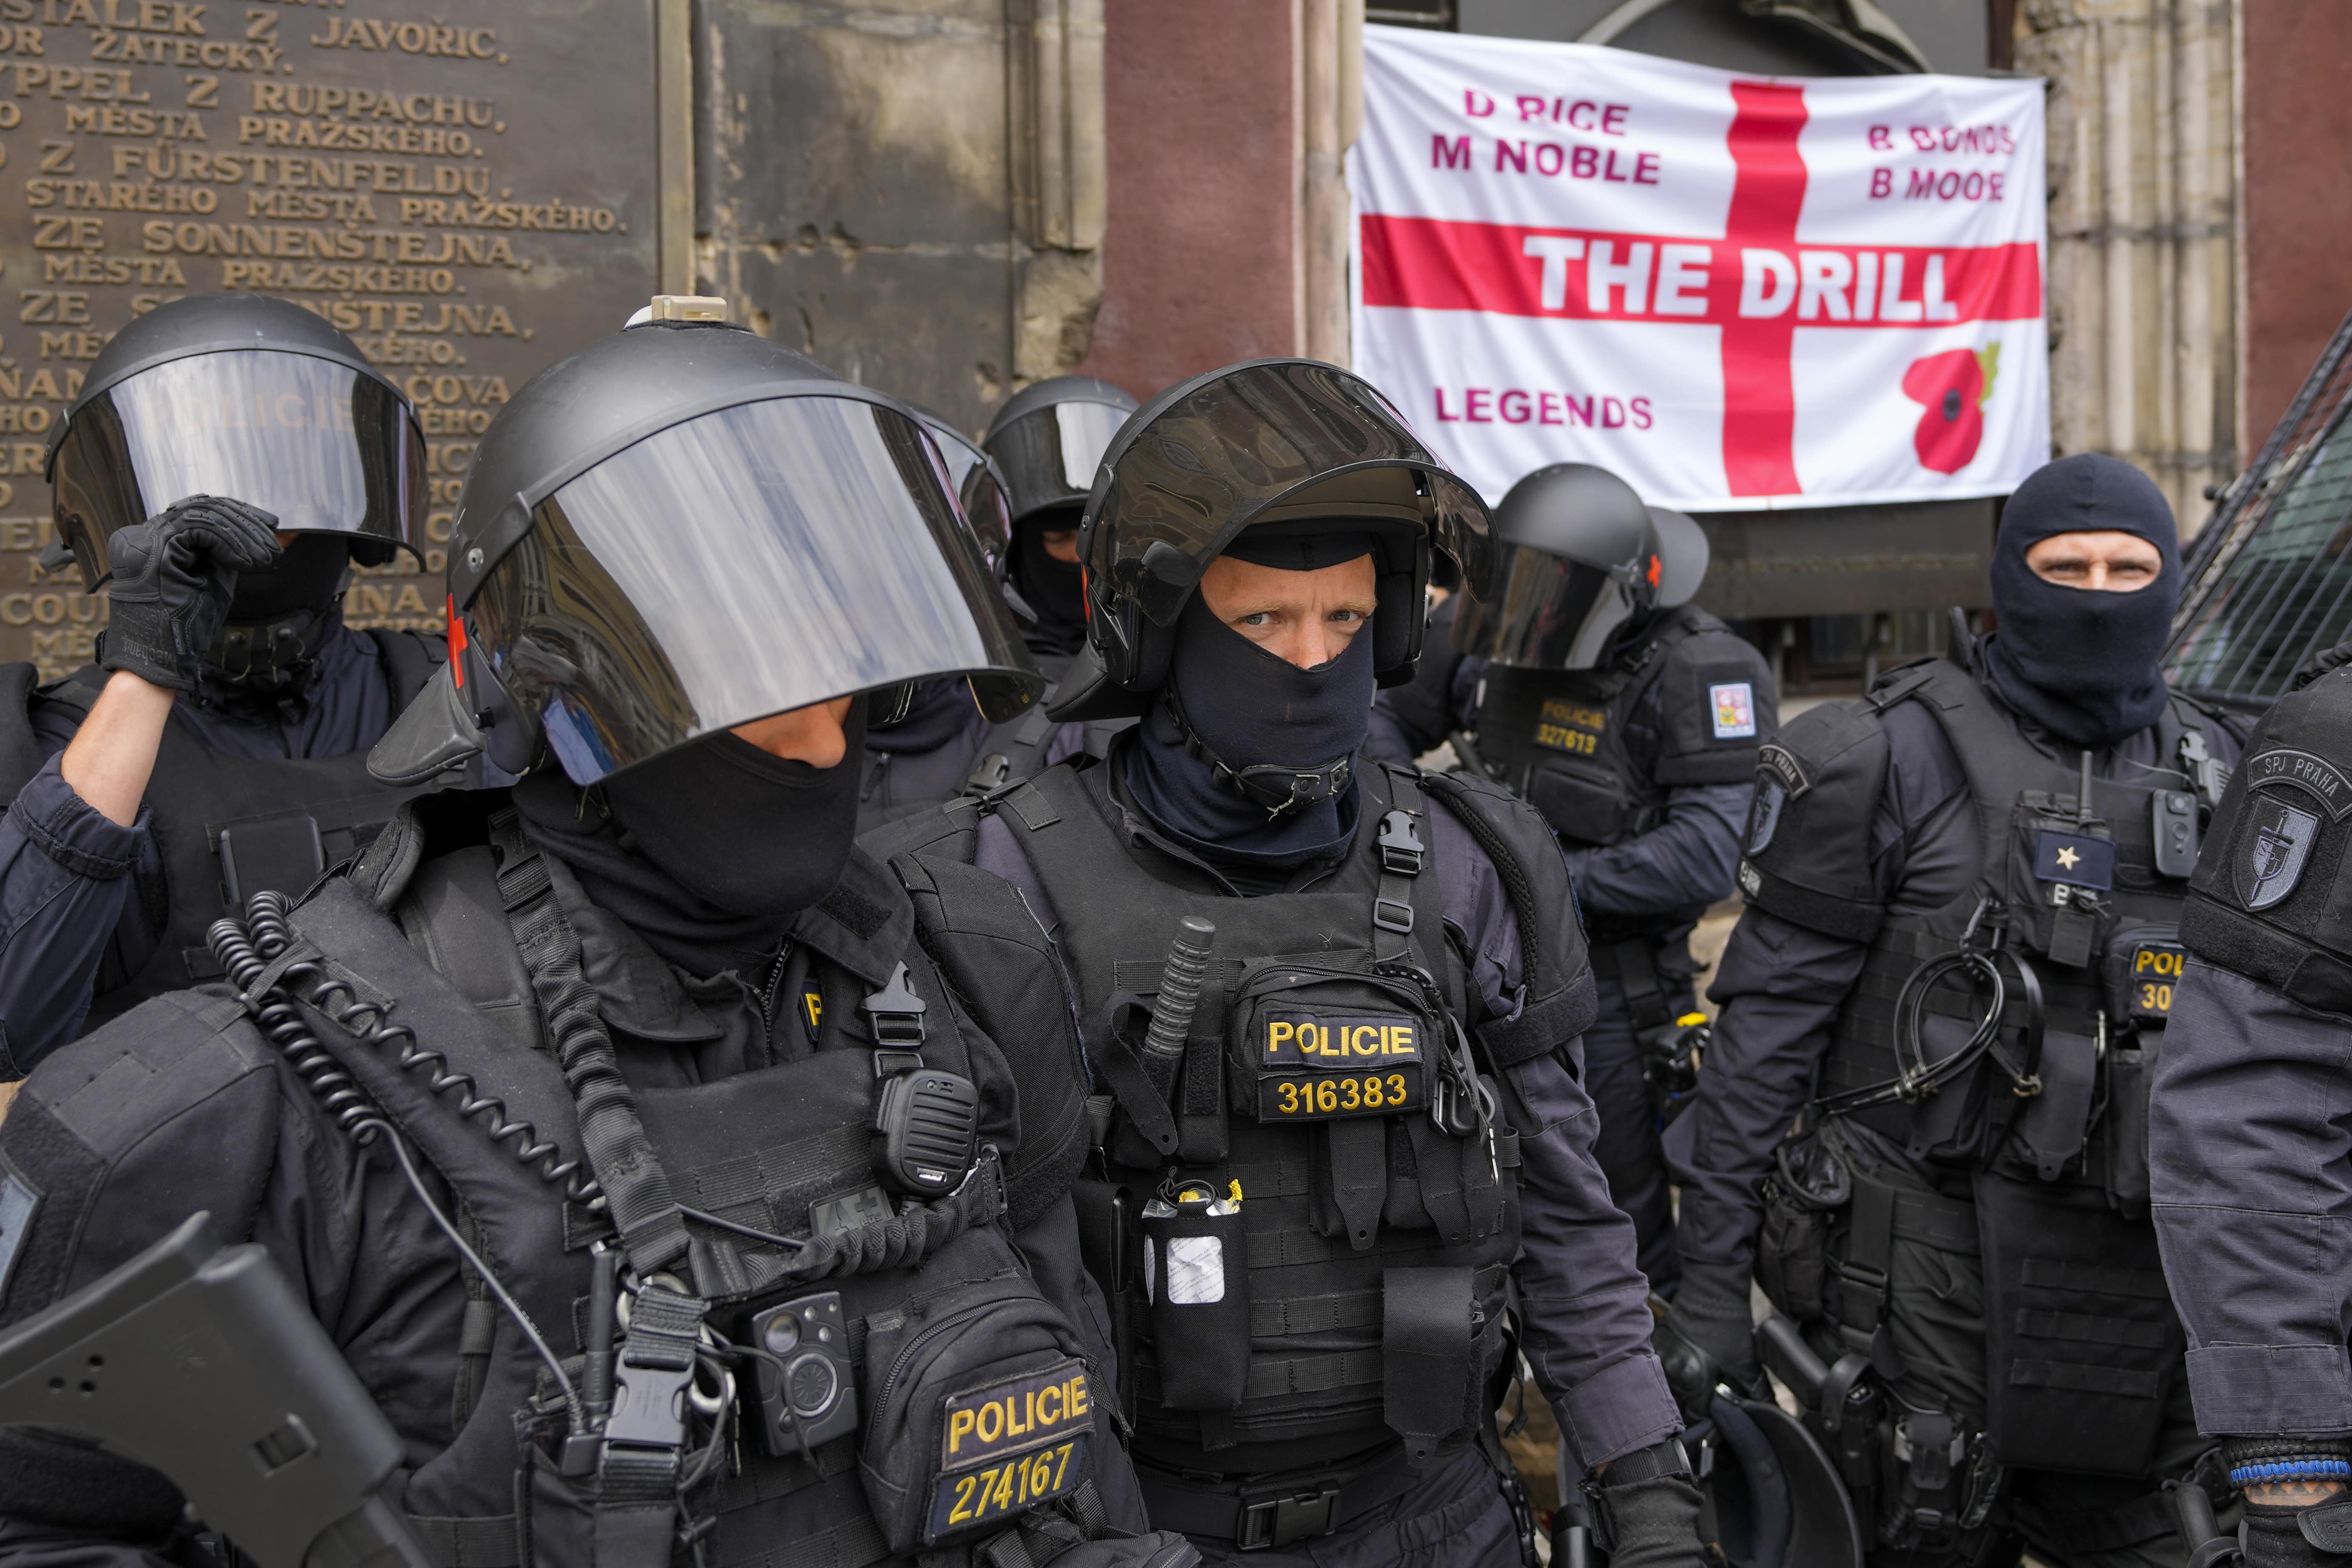 Police detained 16 people following the clashes between fans ahead of the Europa Conference League final